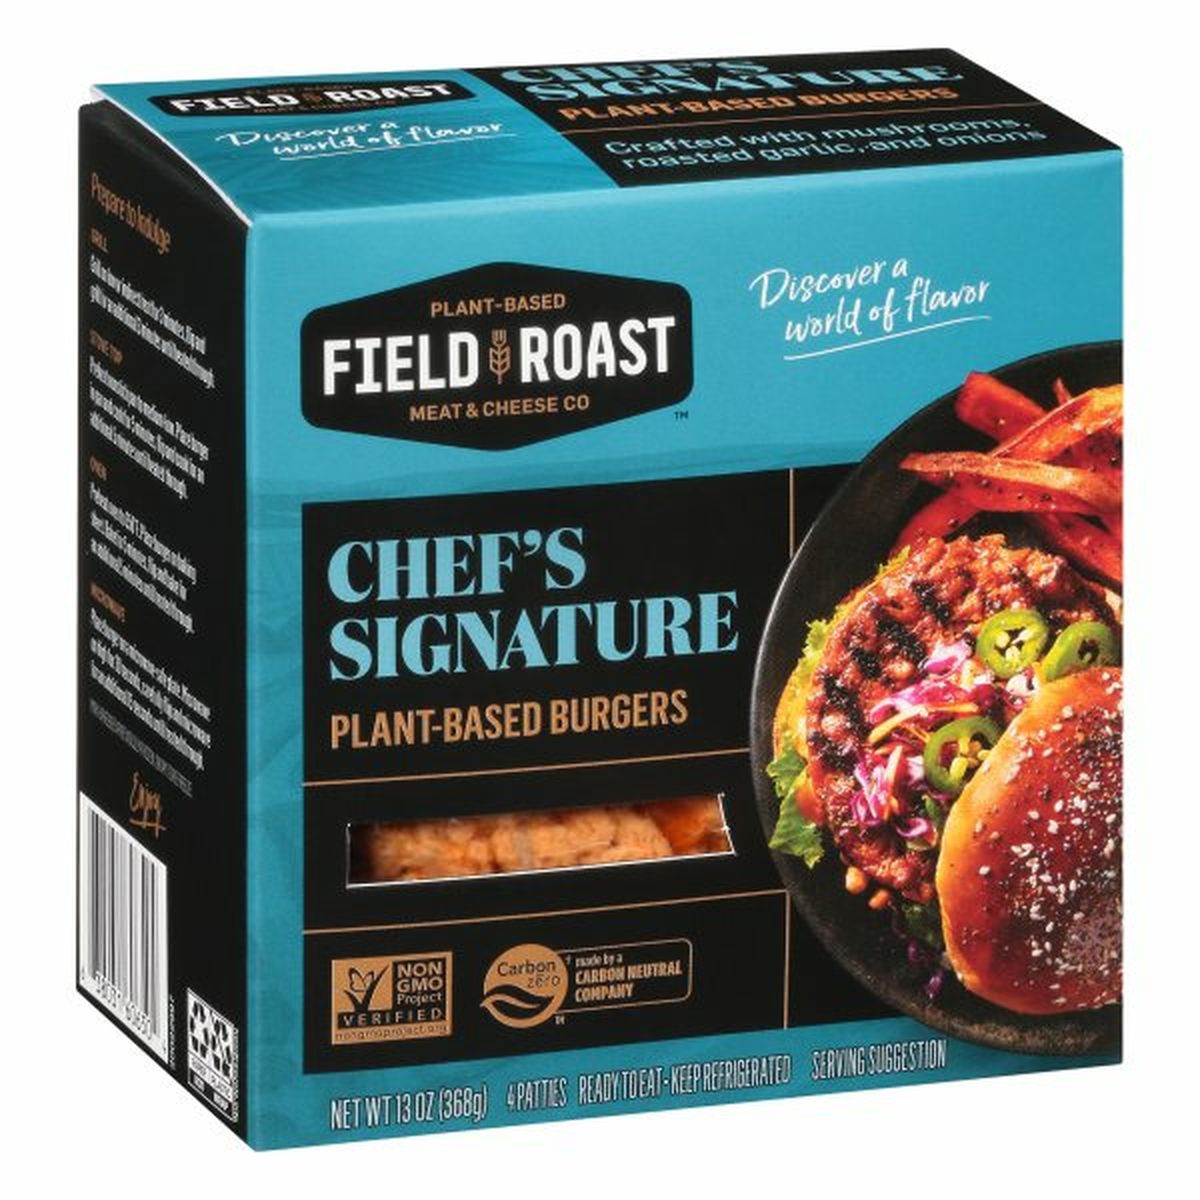 Calories in Field Roast Burgers, Plant-Based, Chef's Signature